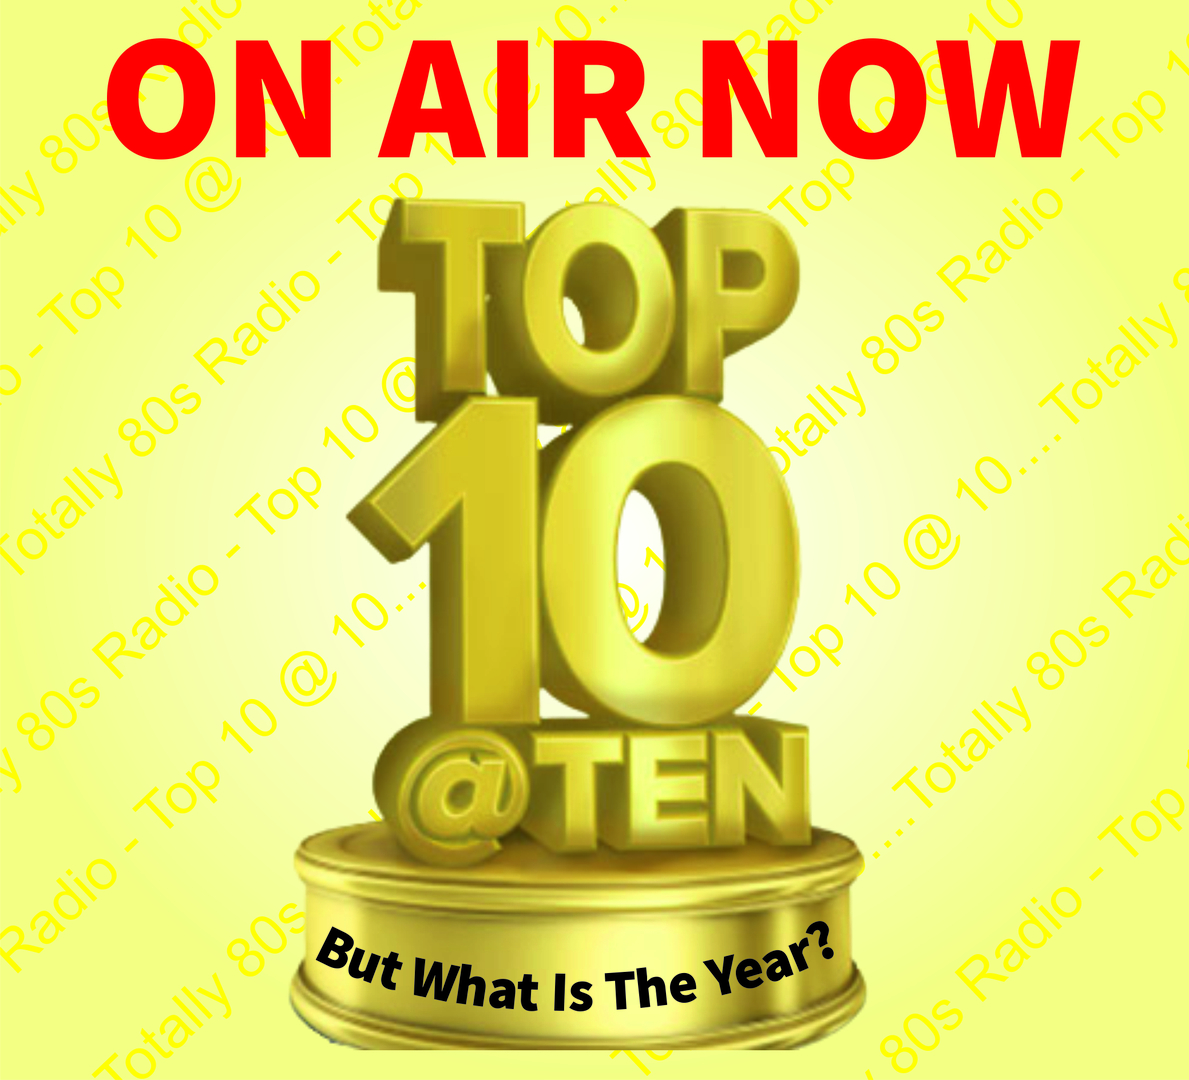 ON AIR now it's the Top 10 at 10, but what is the year? Listen on totally80sradio.co.uk or at radio garden on ift.tt/AnL1y47